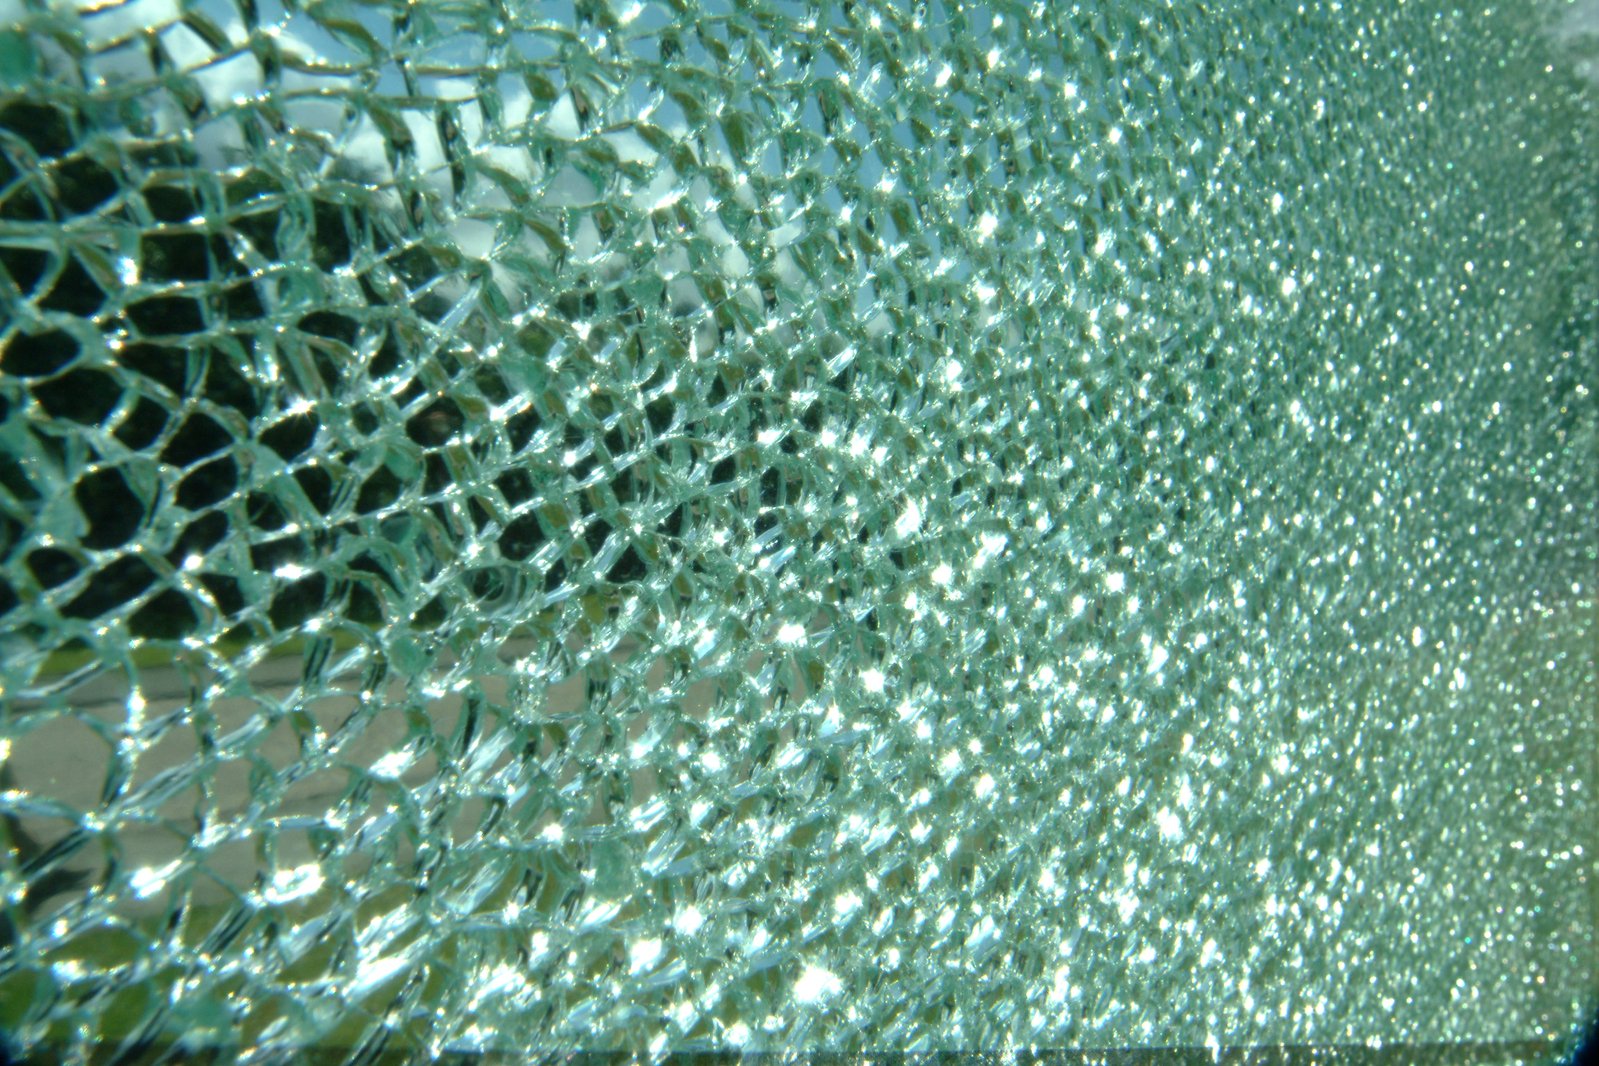 a view of a glass with drops on the side